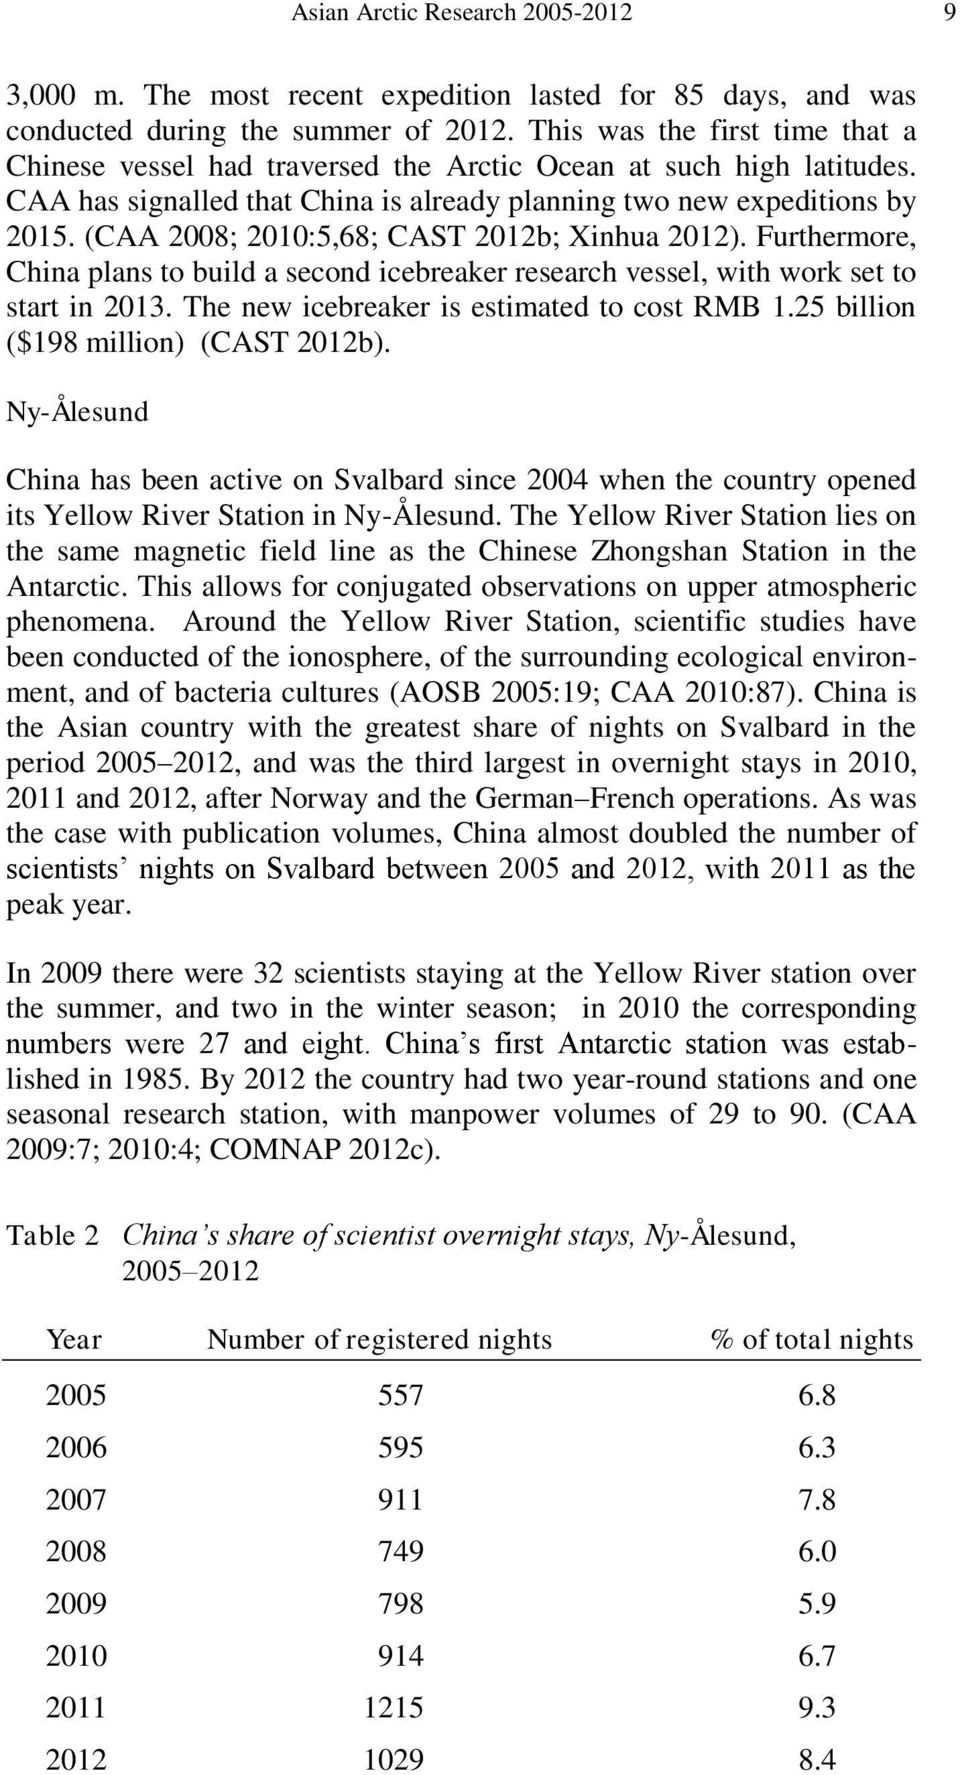 (CAA 2008; 2010:5,68; CAST 2012b; Xinhua 2012). Furthermore, China plans to build a second icebreaker research vessel, with work set to start in 2013. The new icebreaker is estimated to cost RMB 1.